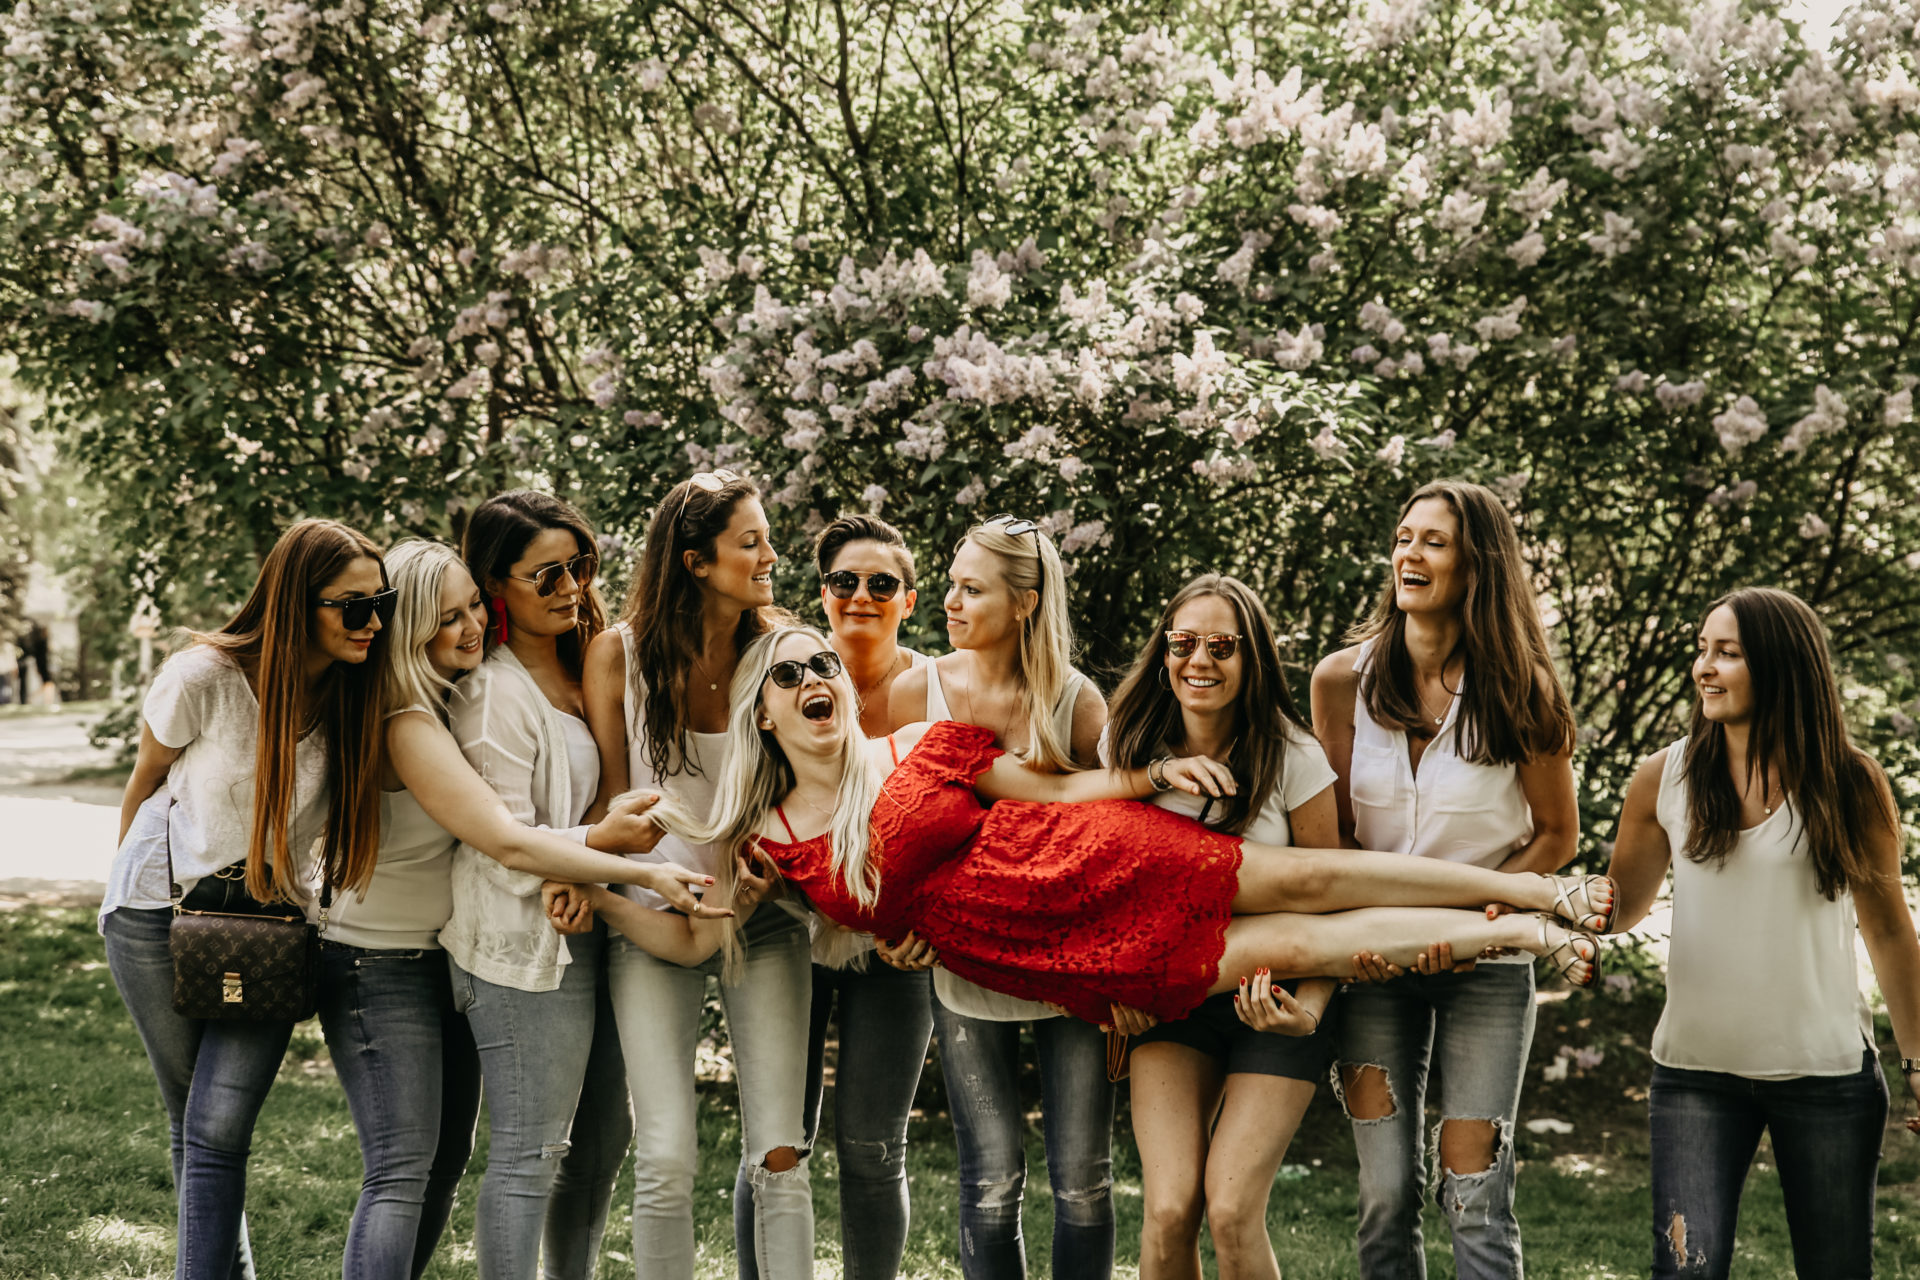 Bachelorette Party Photoshoot Ideas Poses What To Wear